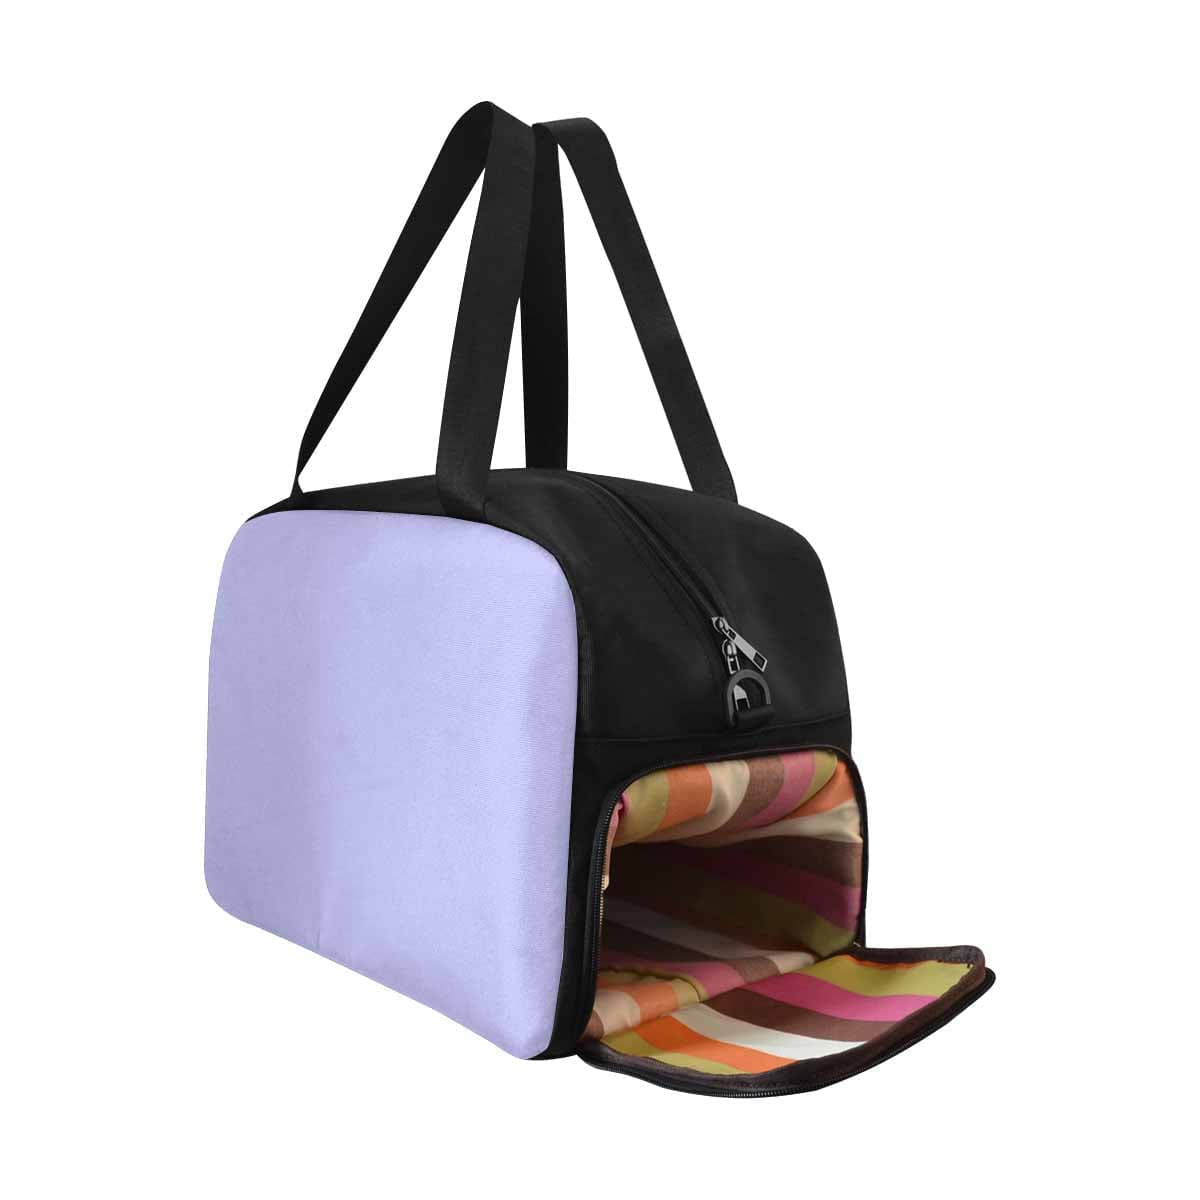 Periwinkle Purple Tote And Crossbody Travel Bag - Bags | Travel Bags | Crossbody